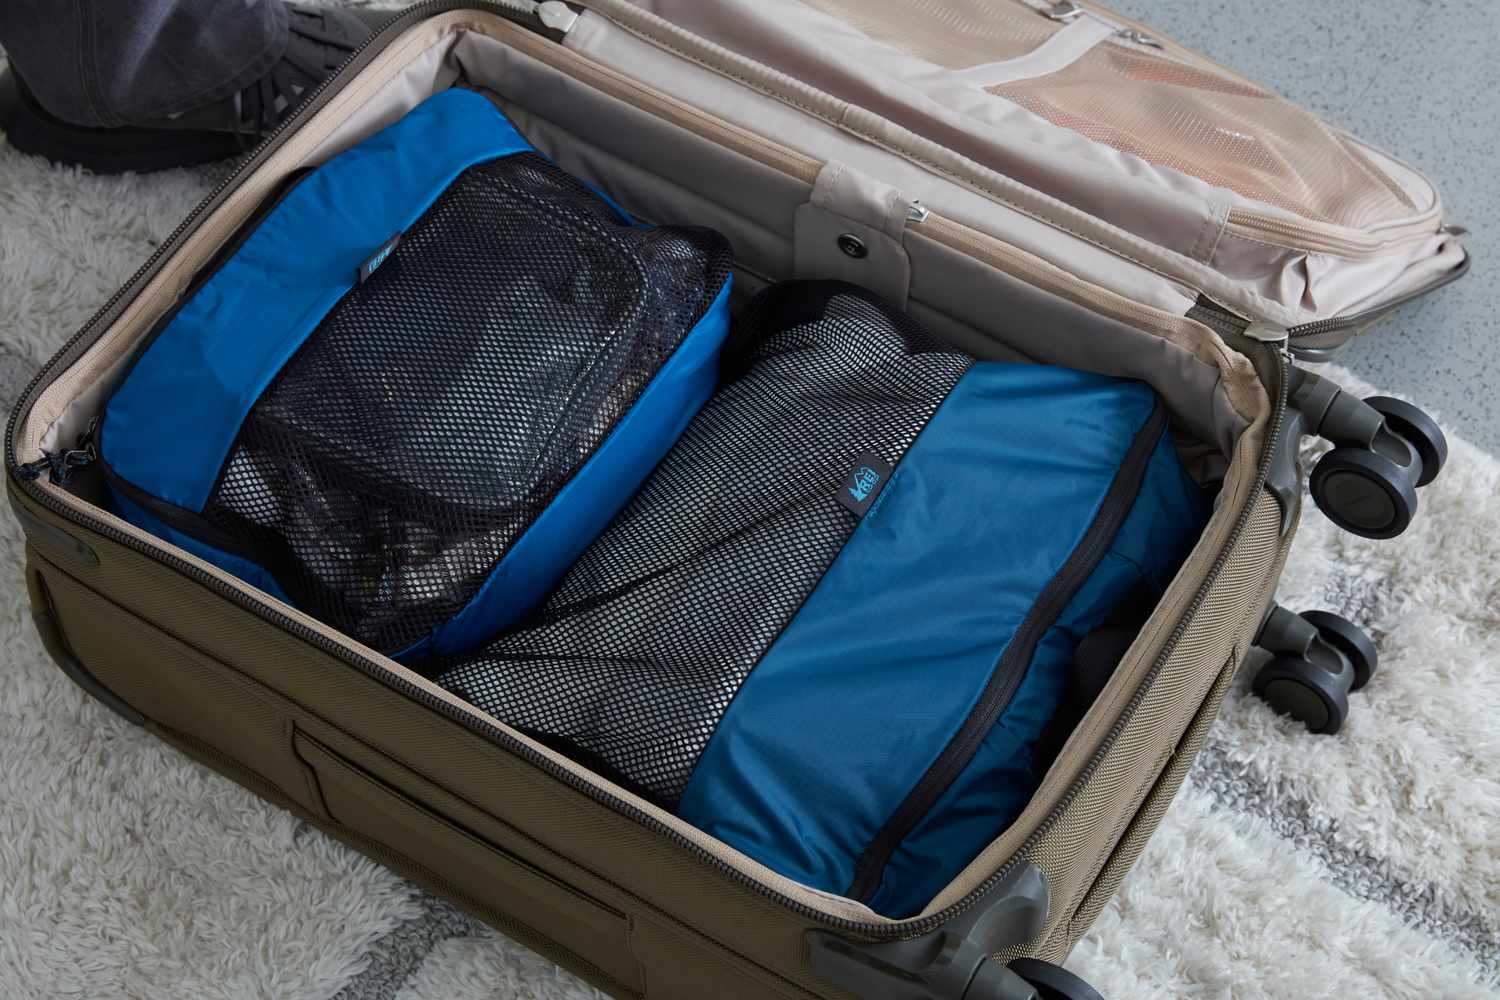 REI Co-op Expandable Packing Cube Set packed inside of a suitcase on rug